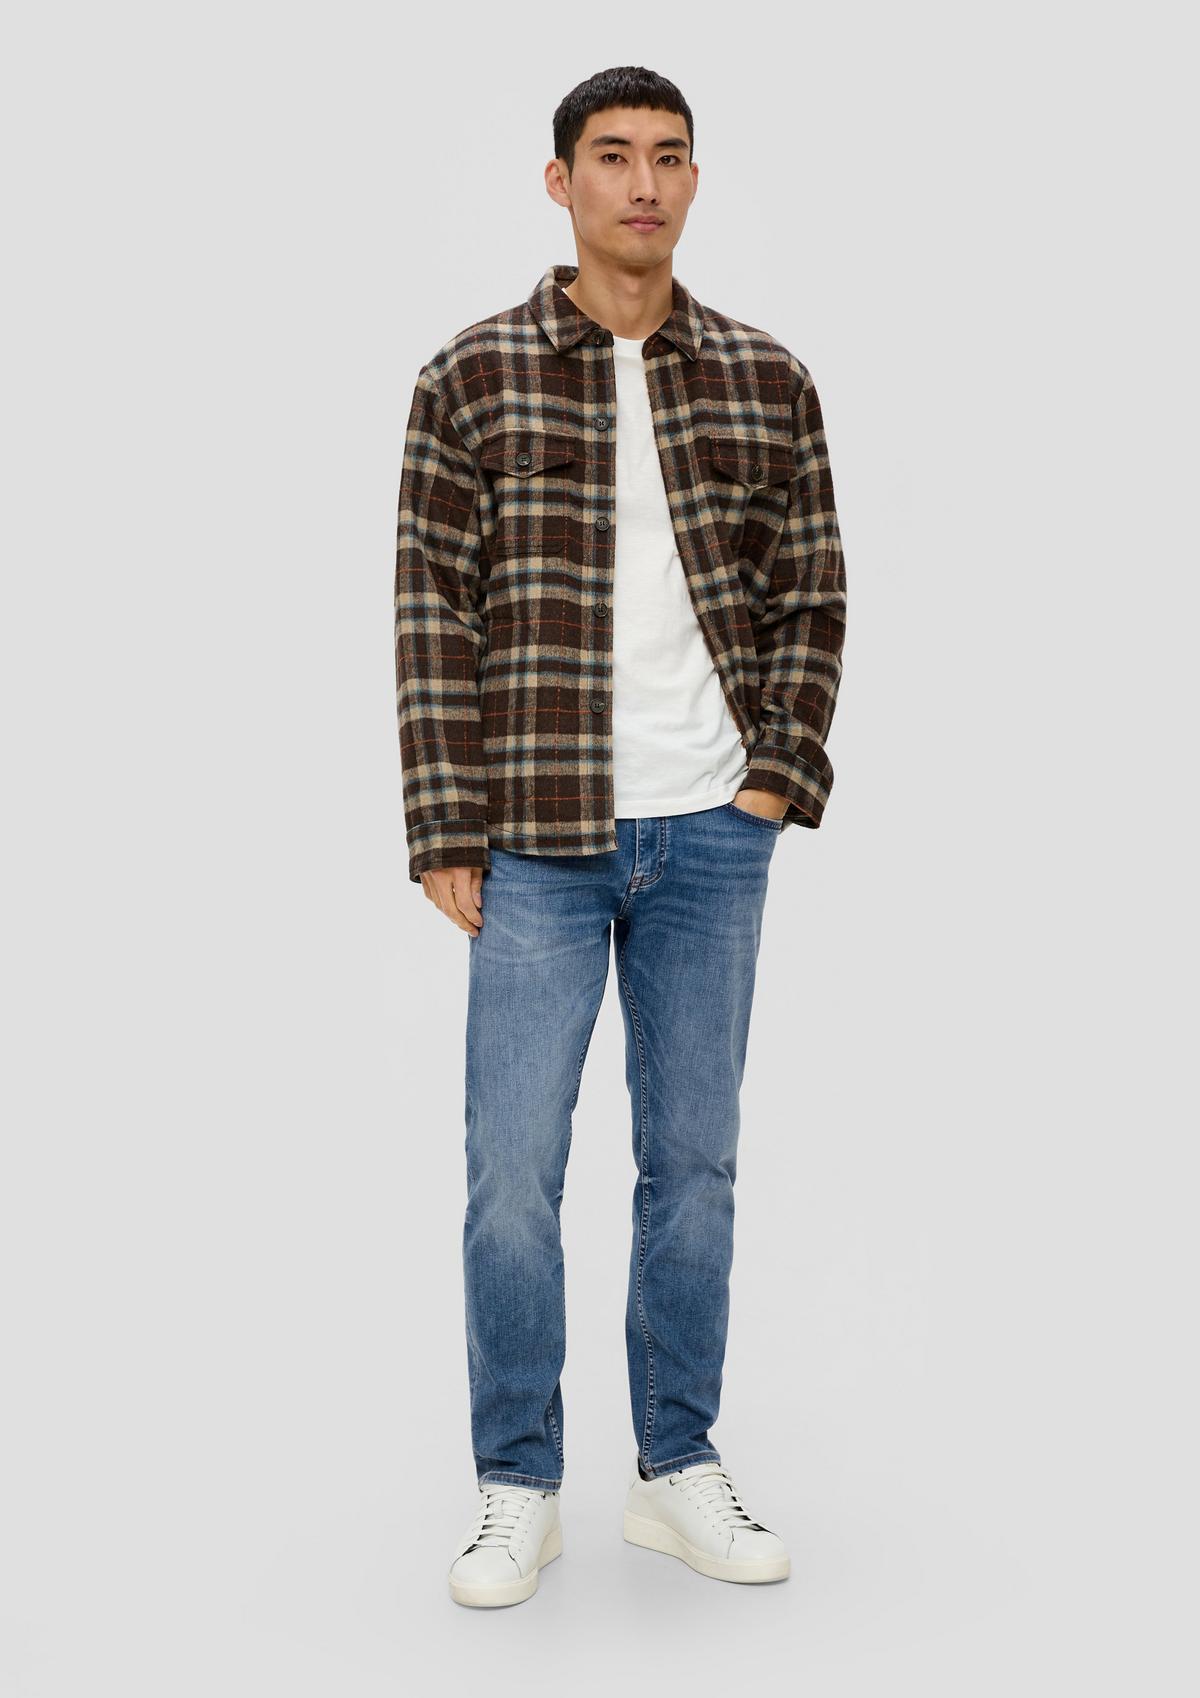 Mauro jeans / regular fit / high rise / tapered leg